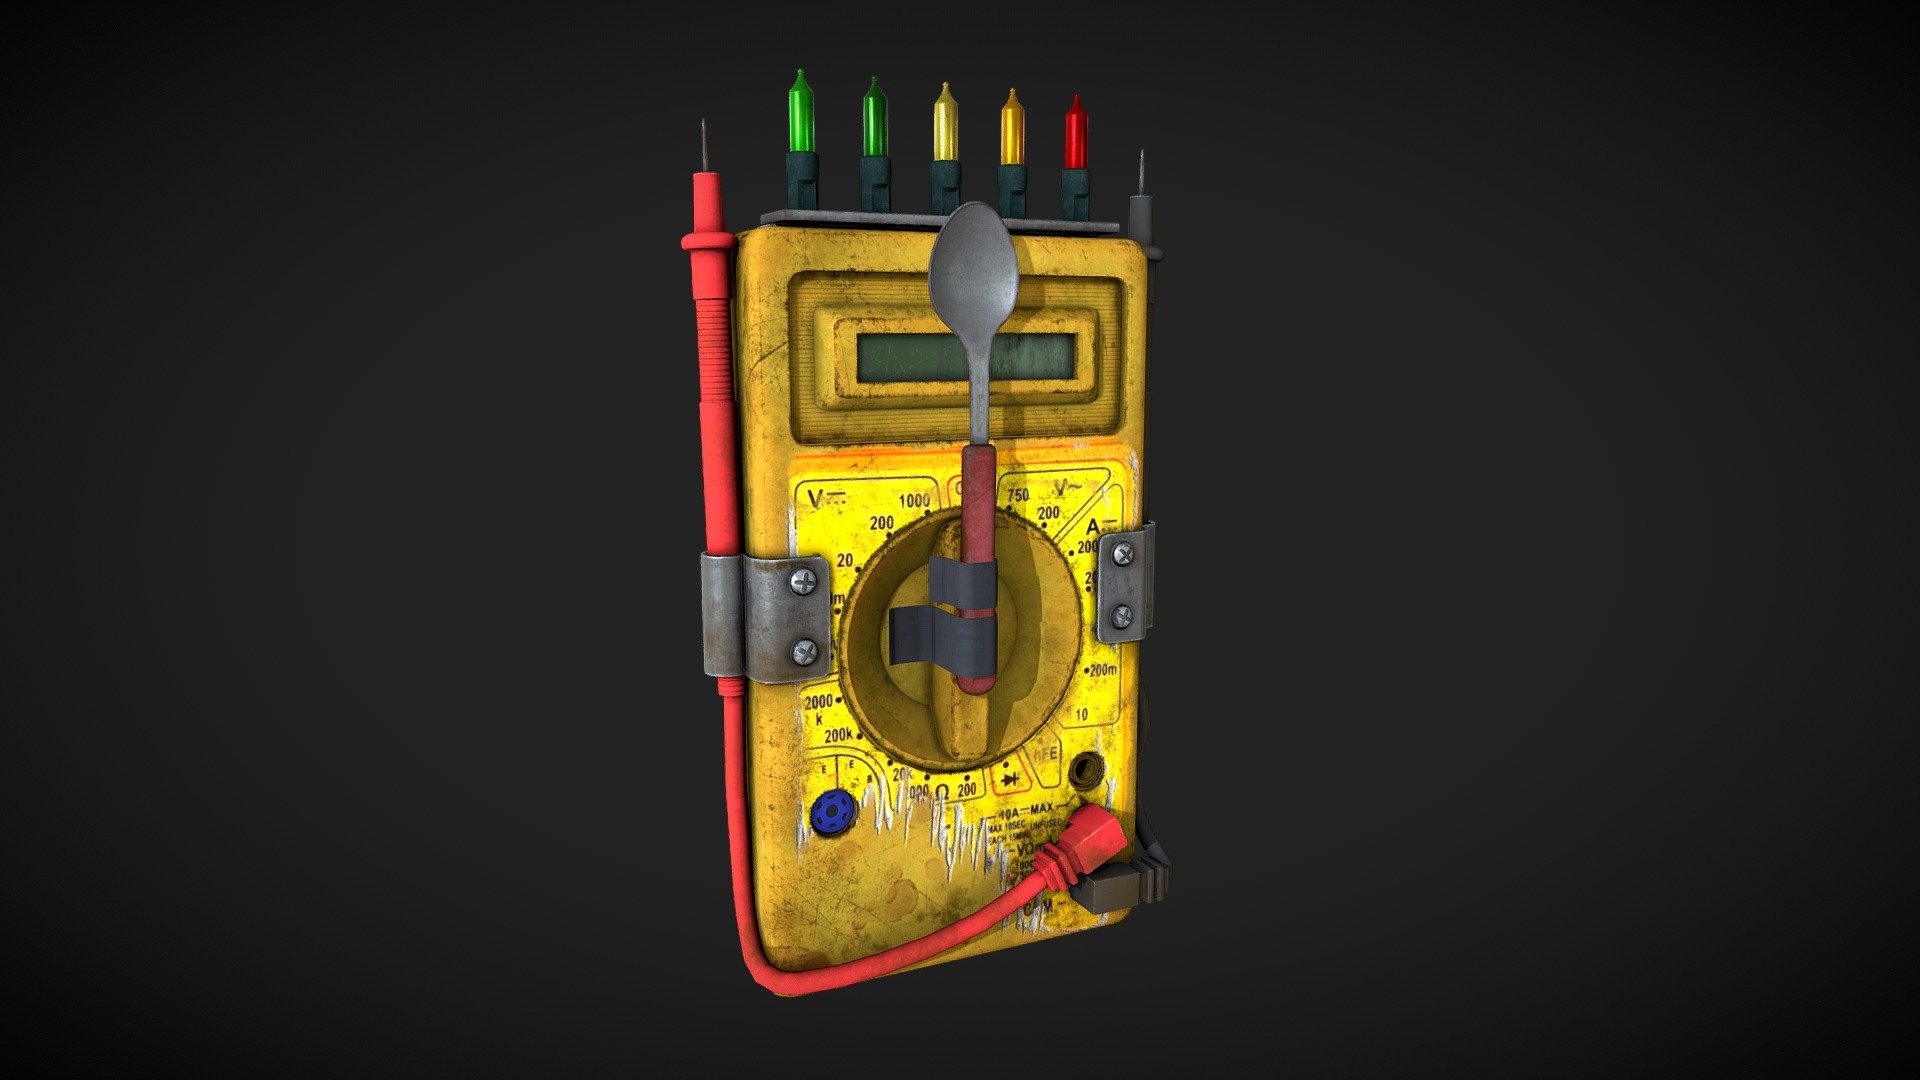 EMF Multimeter with a Spoon




4k Textures

High quality material

Ready for game

Separated parts for animate

if you need to remove the casper sticker to use it commercialy please send me a message 3d model